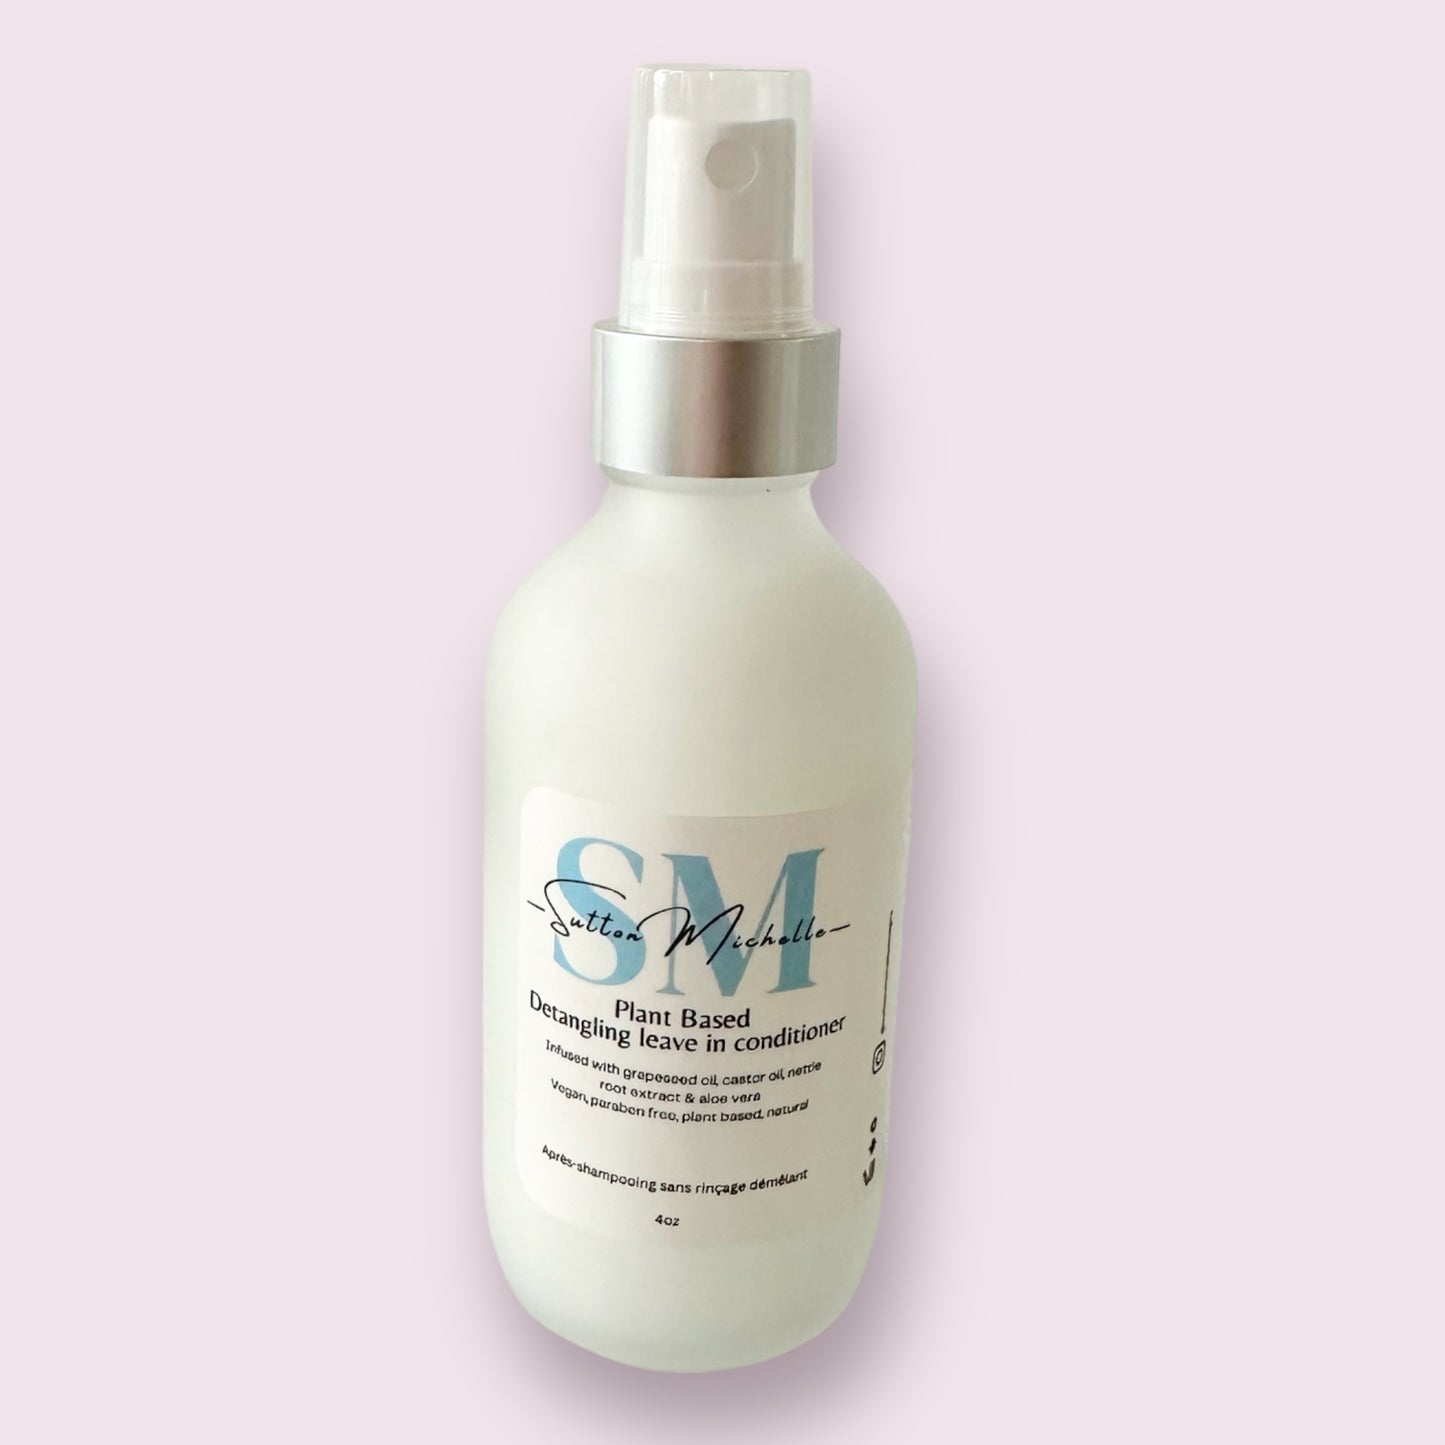 Leave in conditioner by Sutton Michelle